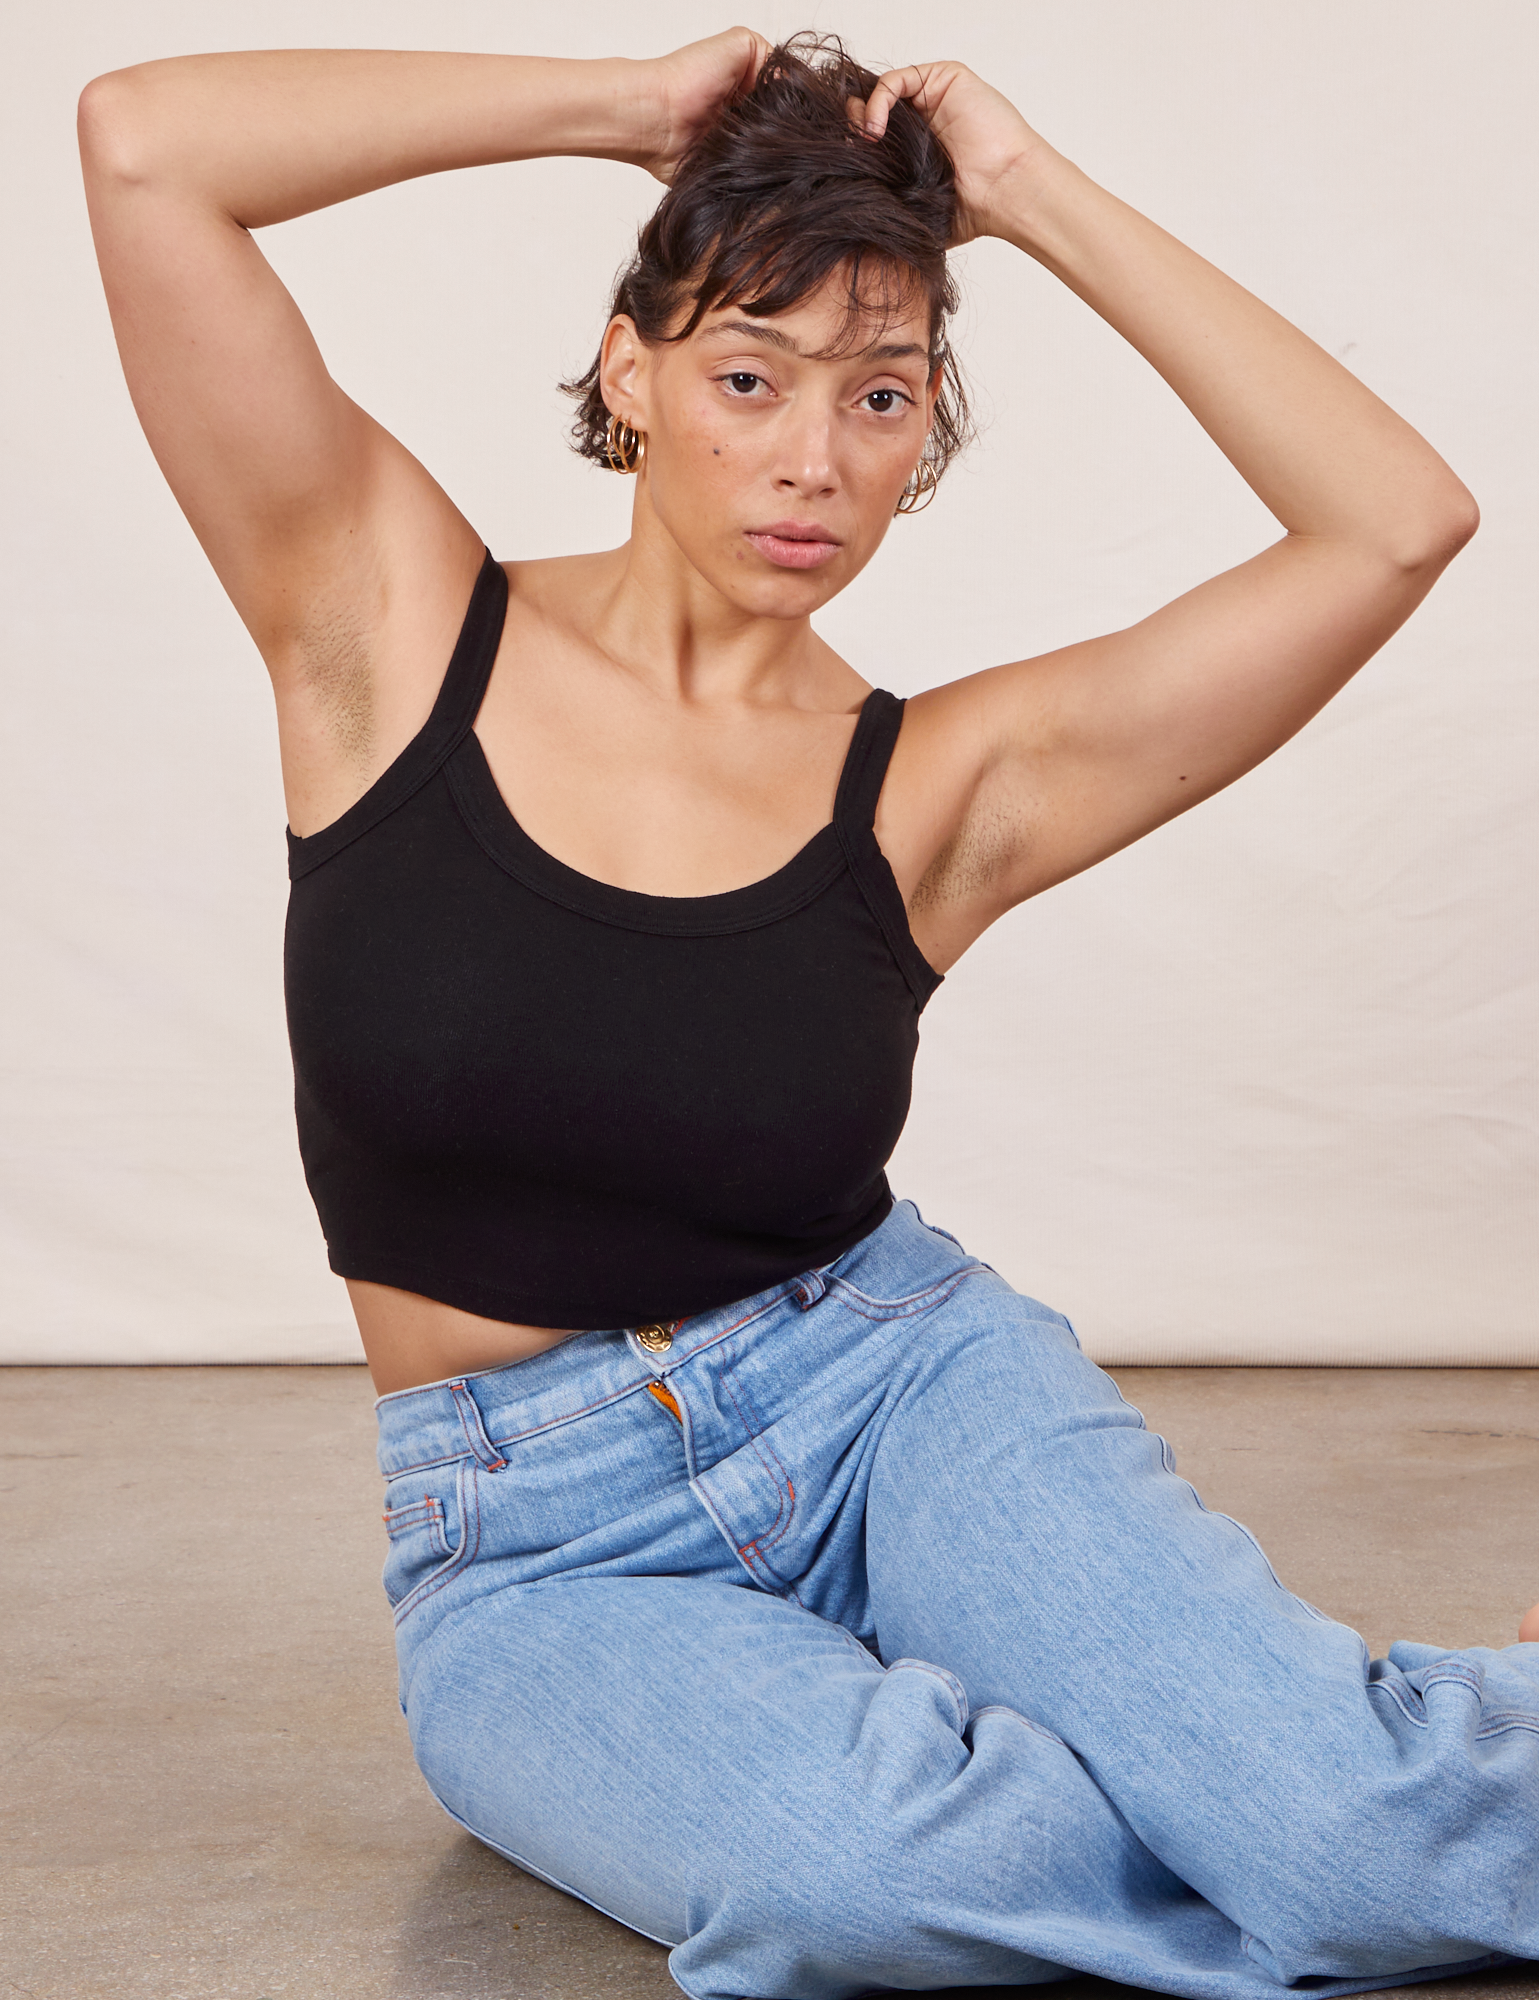 Tiara is sitting on the concrete floor wearing Cropped Cami in Basic Black and light wash Sailor Jeans